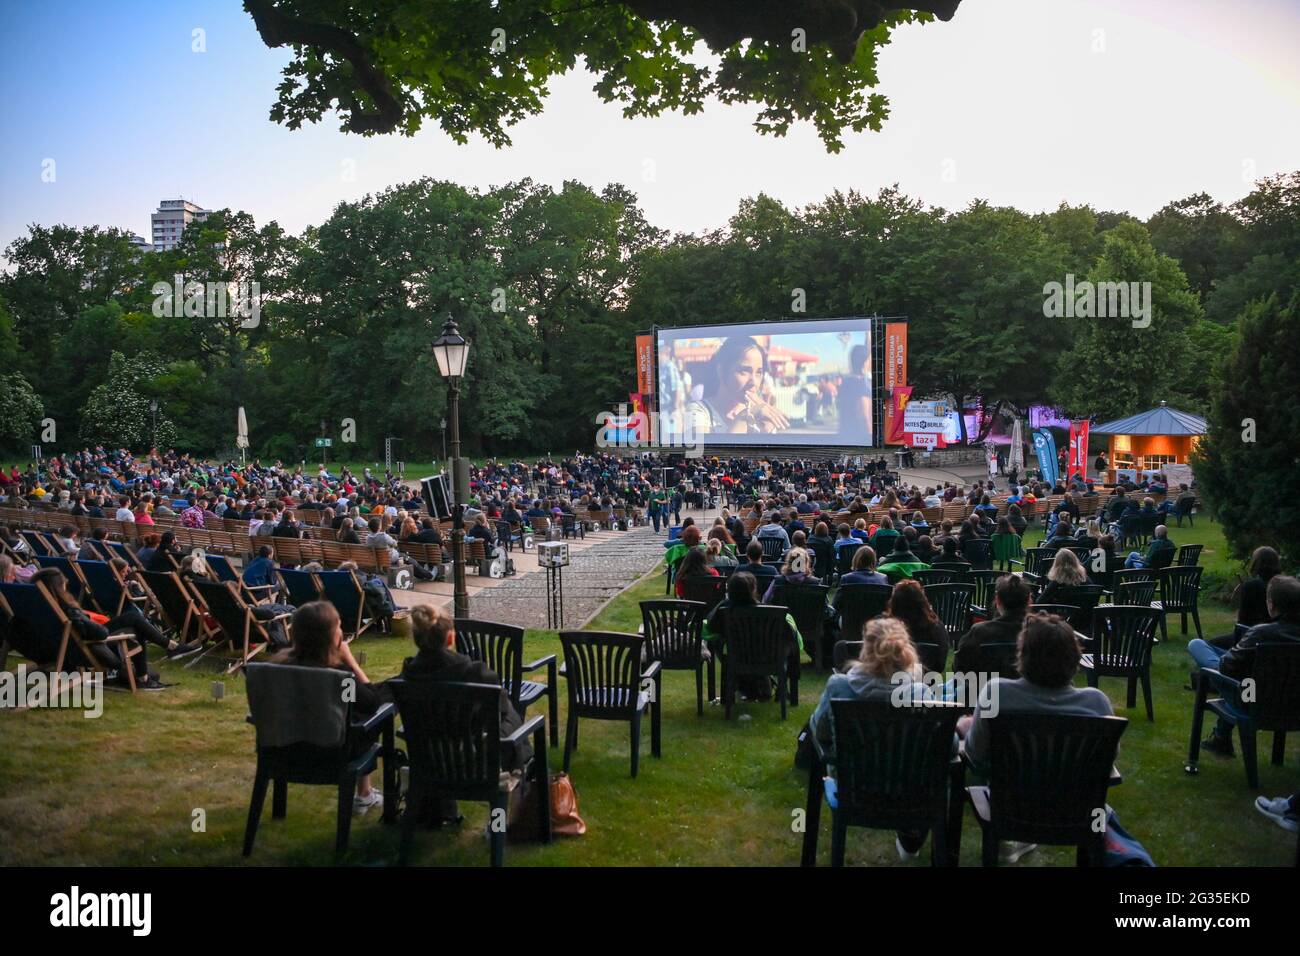 Berlin, Germany. 13th June, 2021. Numerous audience members sit during a late-night screening at the Friedrichshain open-air cinema during the premiere of 'The World Will Be a Different Place' of the Panorama section at the 71st International Film Festival. Following a digital format in March, the Berlinale opens its summer festival to the public. Credit: Jens Kalaene/dpa-Zentralbidl/dpa/Alamy Live News Stock Photo